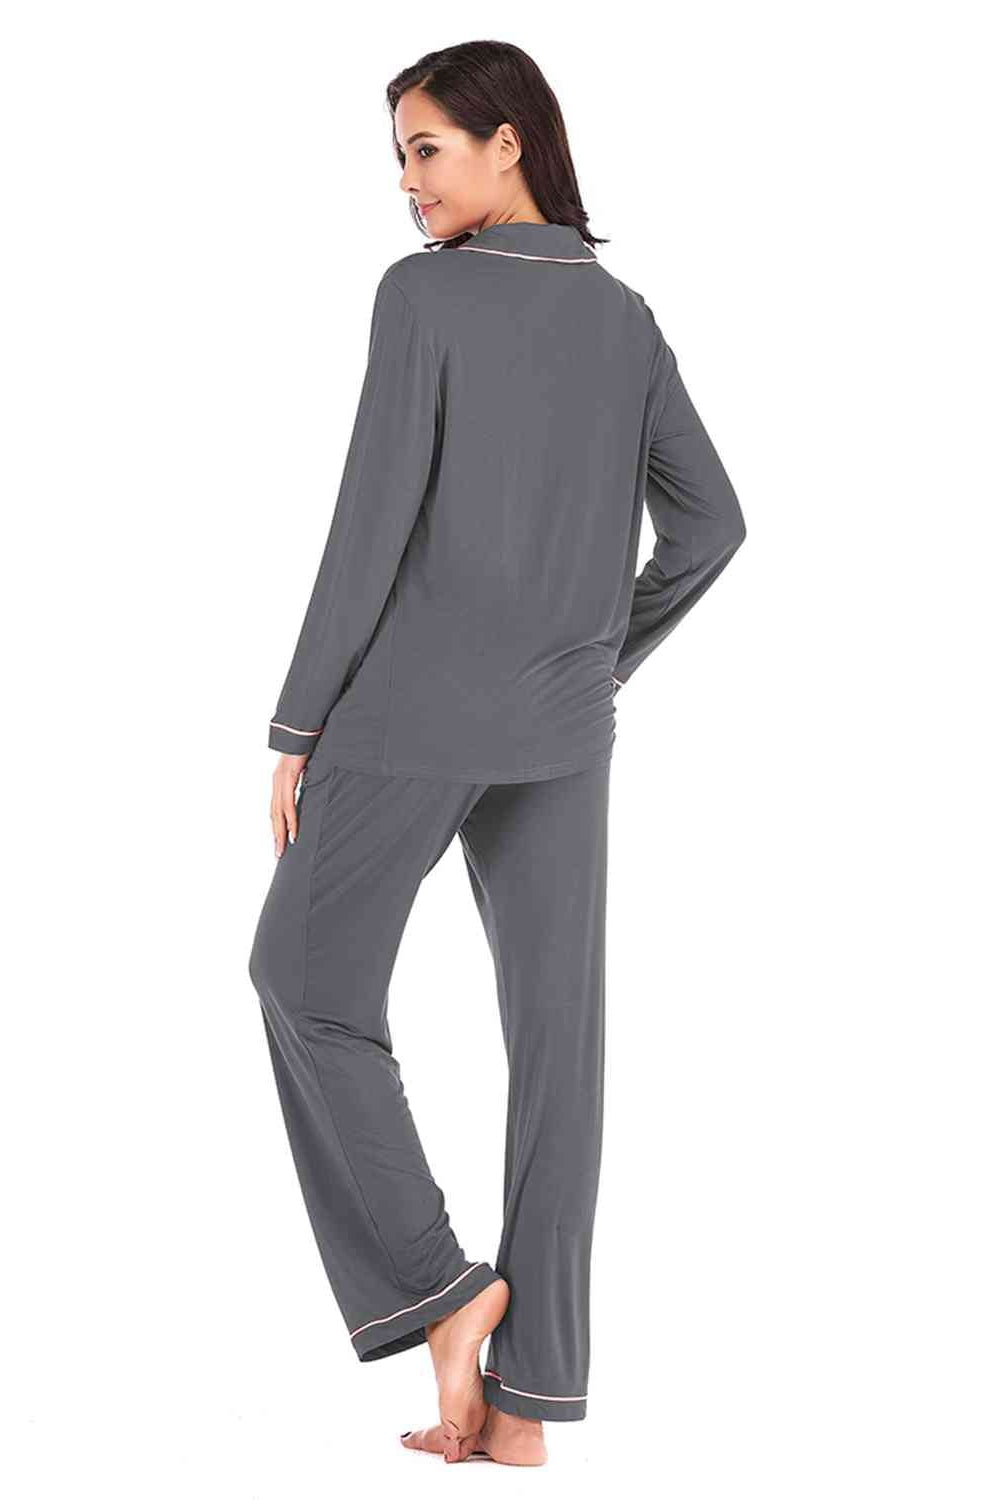 Collared Neck Long Sleeve Loungewear Set with Pockets - GemThreads Boutique